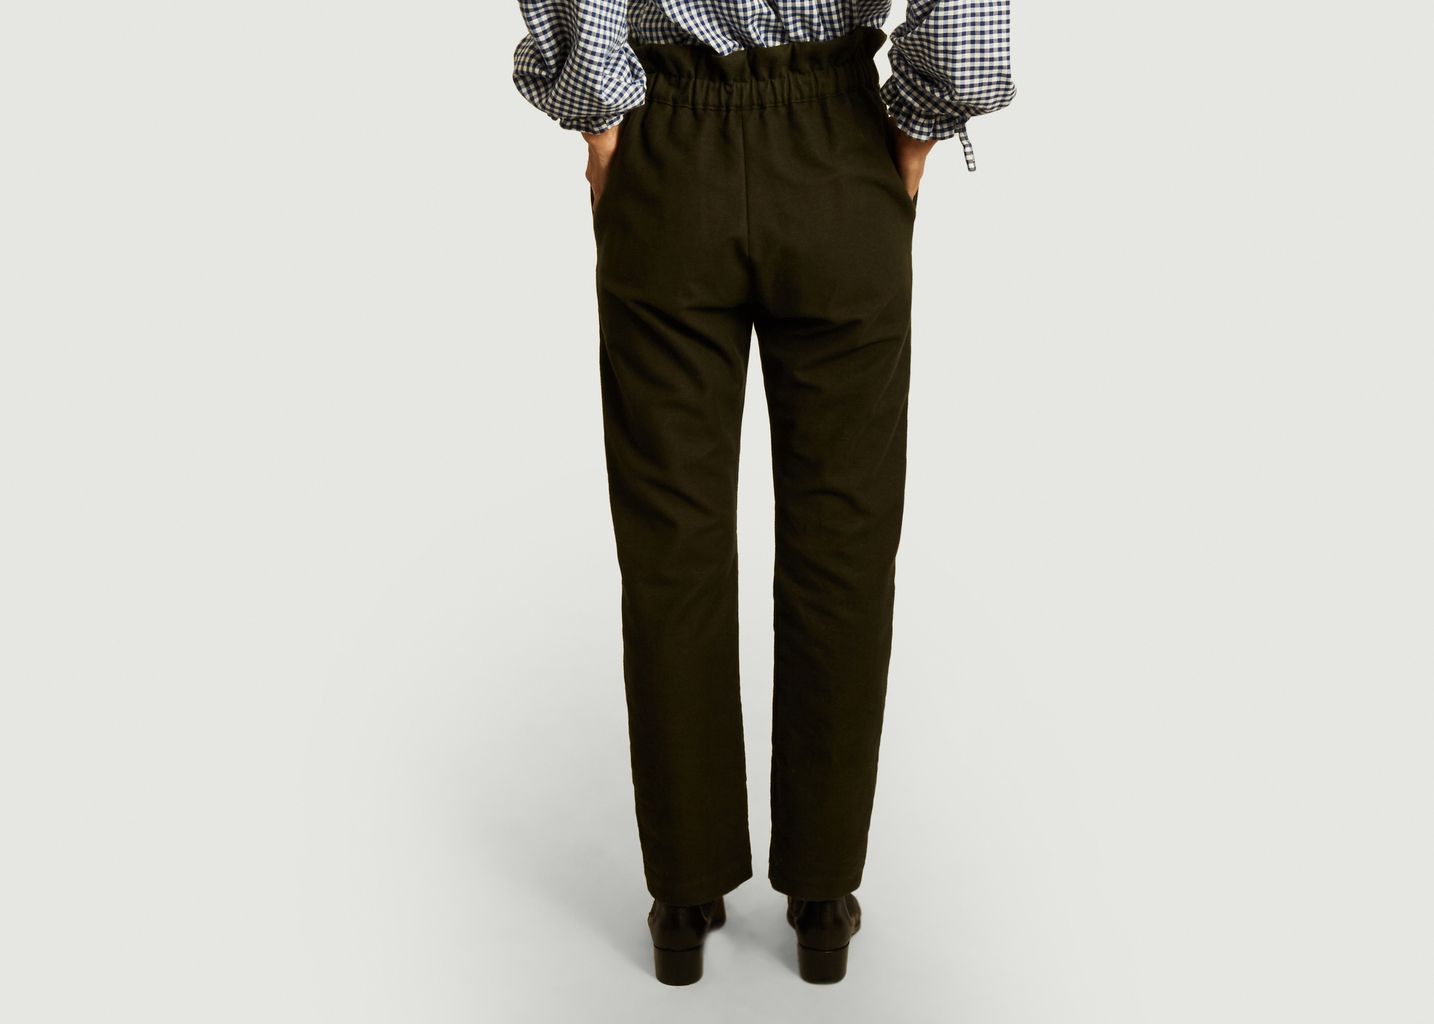 Louise cotton trousers - Gaëlle constantini